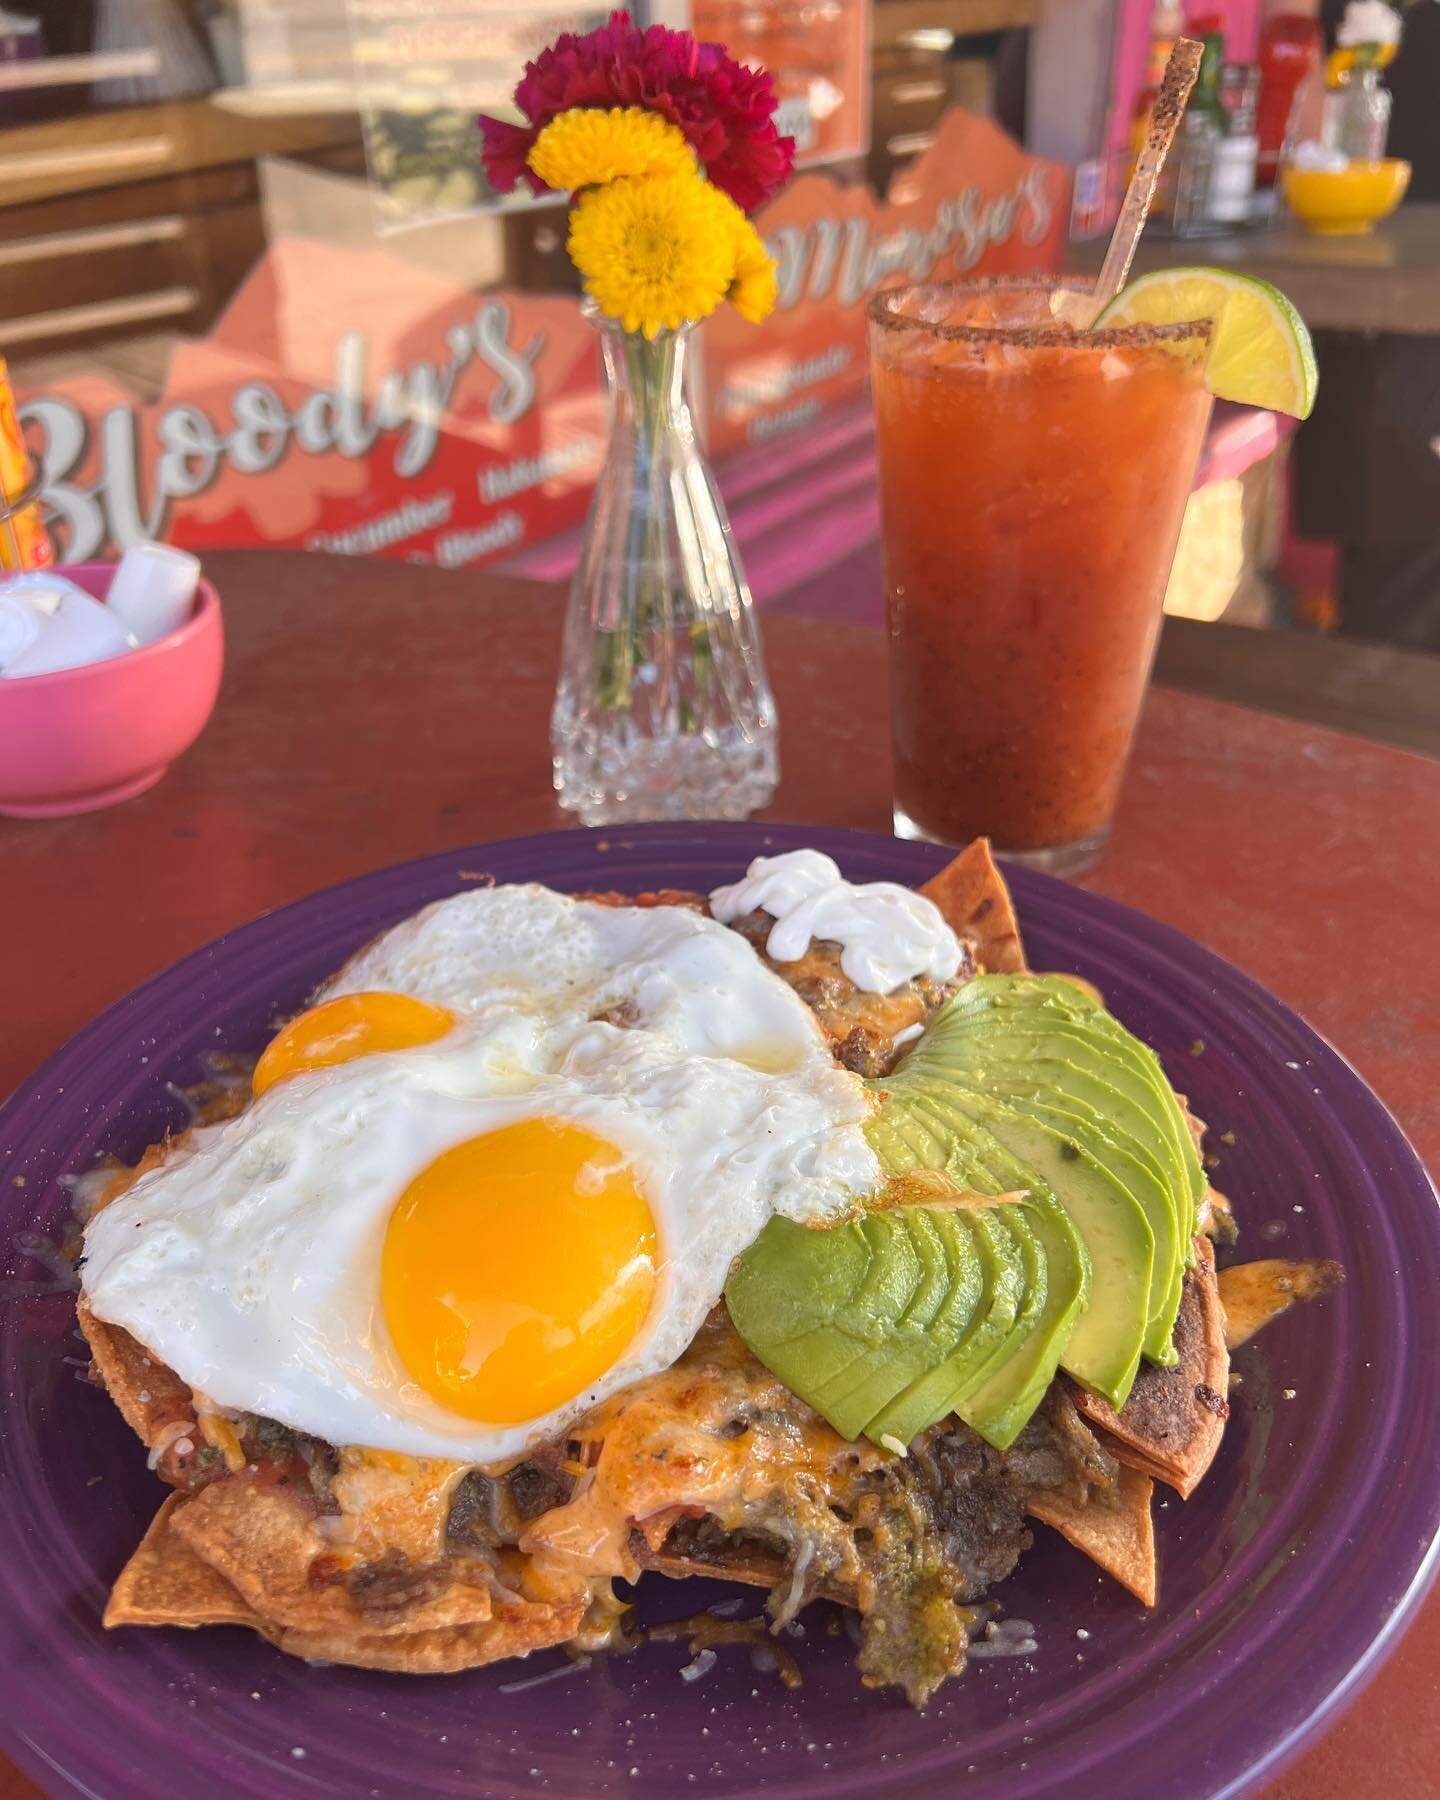 Carne asada breakfast nachos!! On special today only for CINCO DE MAYO!! Stop on by and live your best life with these beany, cheesy, meaty nachos with avocado, salsa, sour cream and choice of eggs. For best results pair with our house michelada!